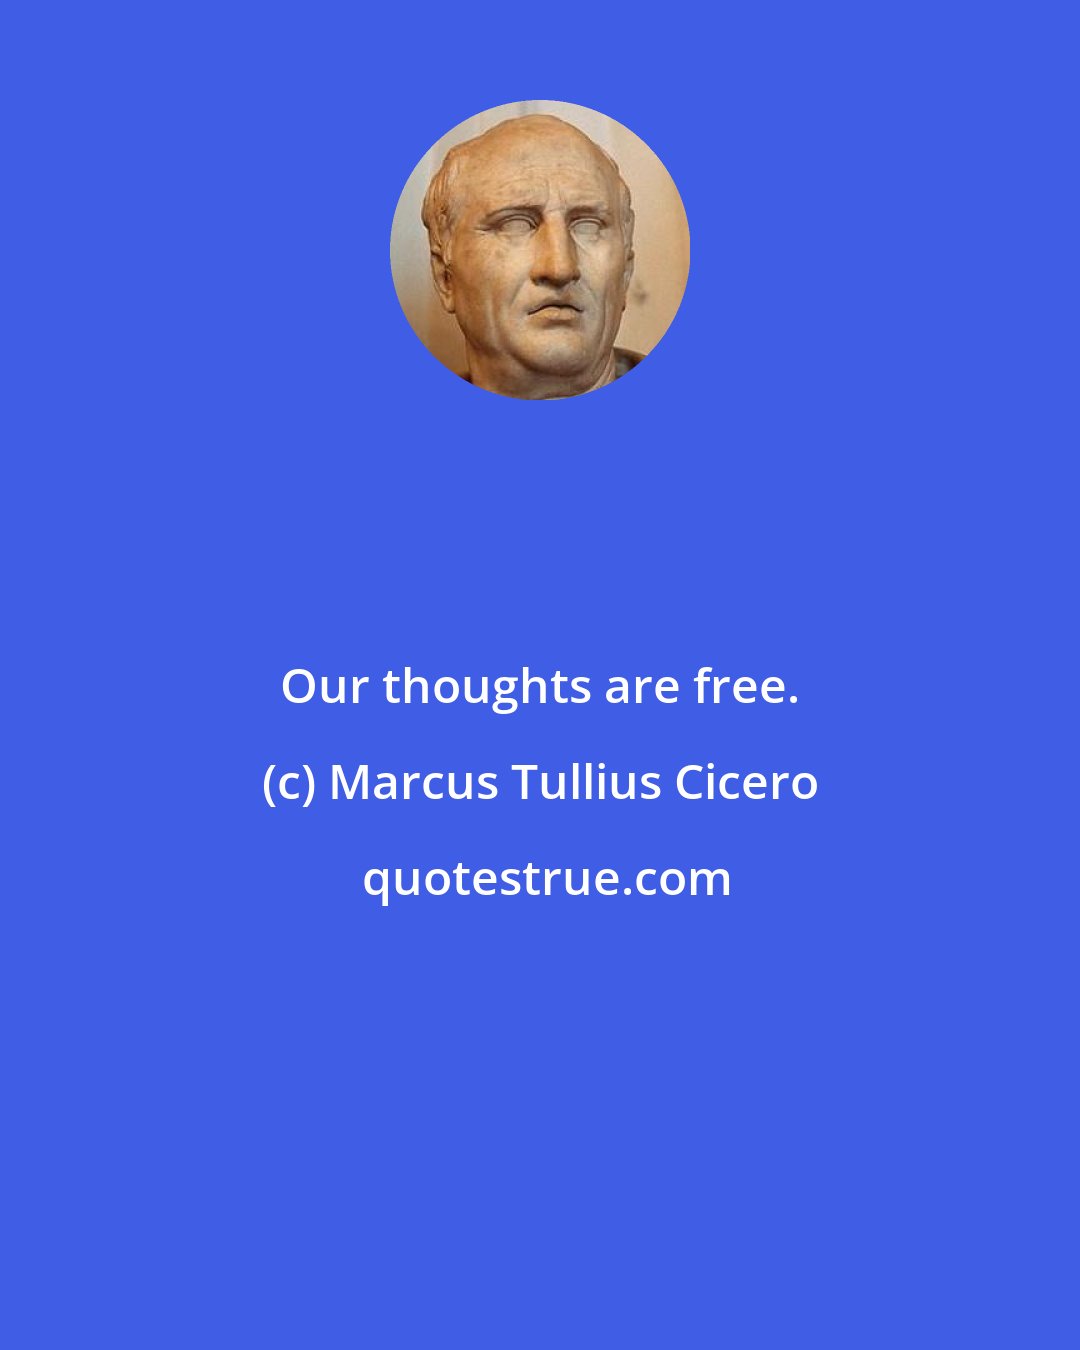 Marcus Tullius Cicero: Our thoughts are free.